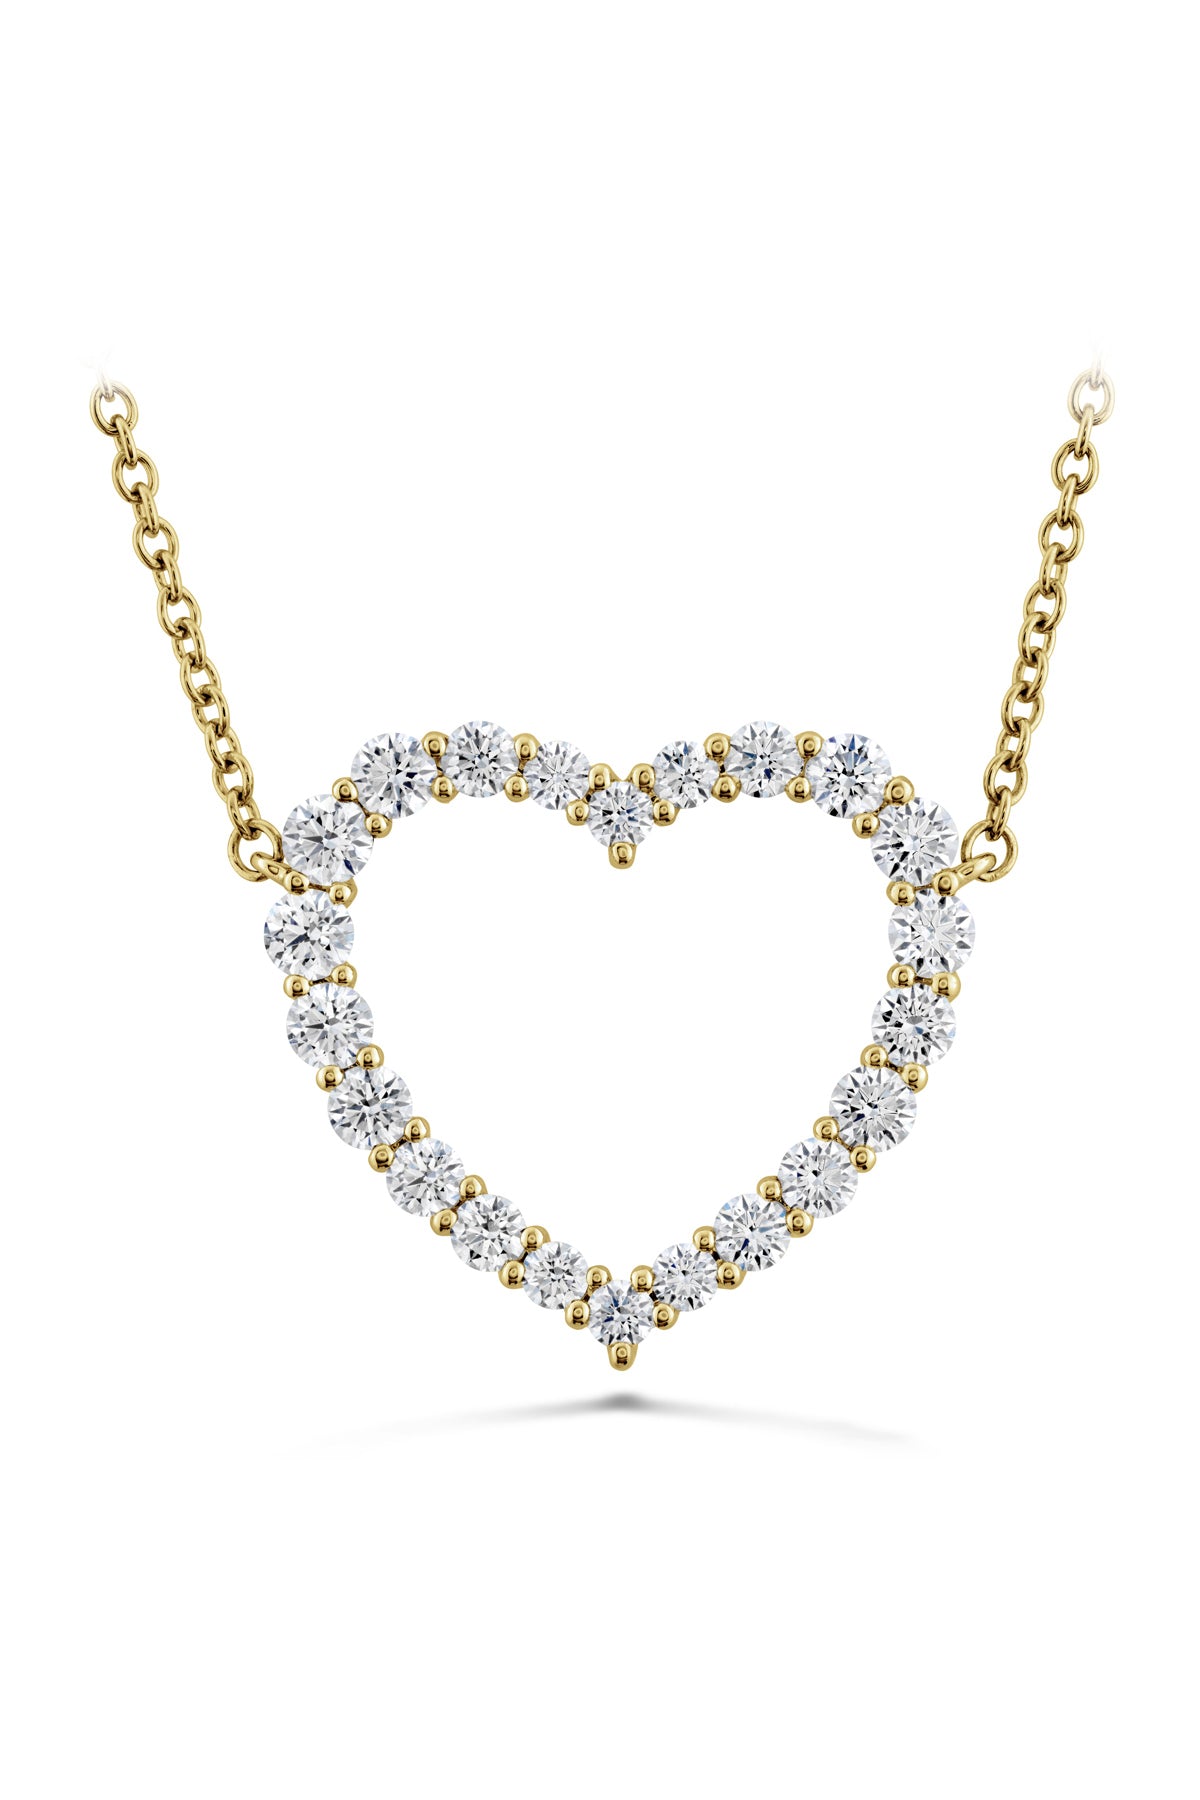 Signature Heart Pendant - Large From Hearts On Fire available at LeGassick Diamonds and Jewellery Gold Coast, Australia.